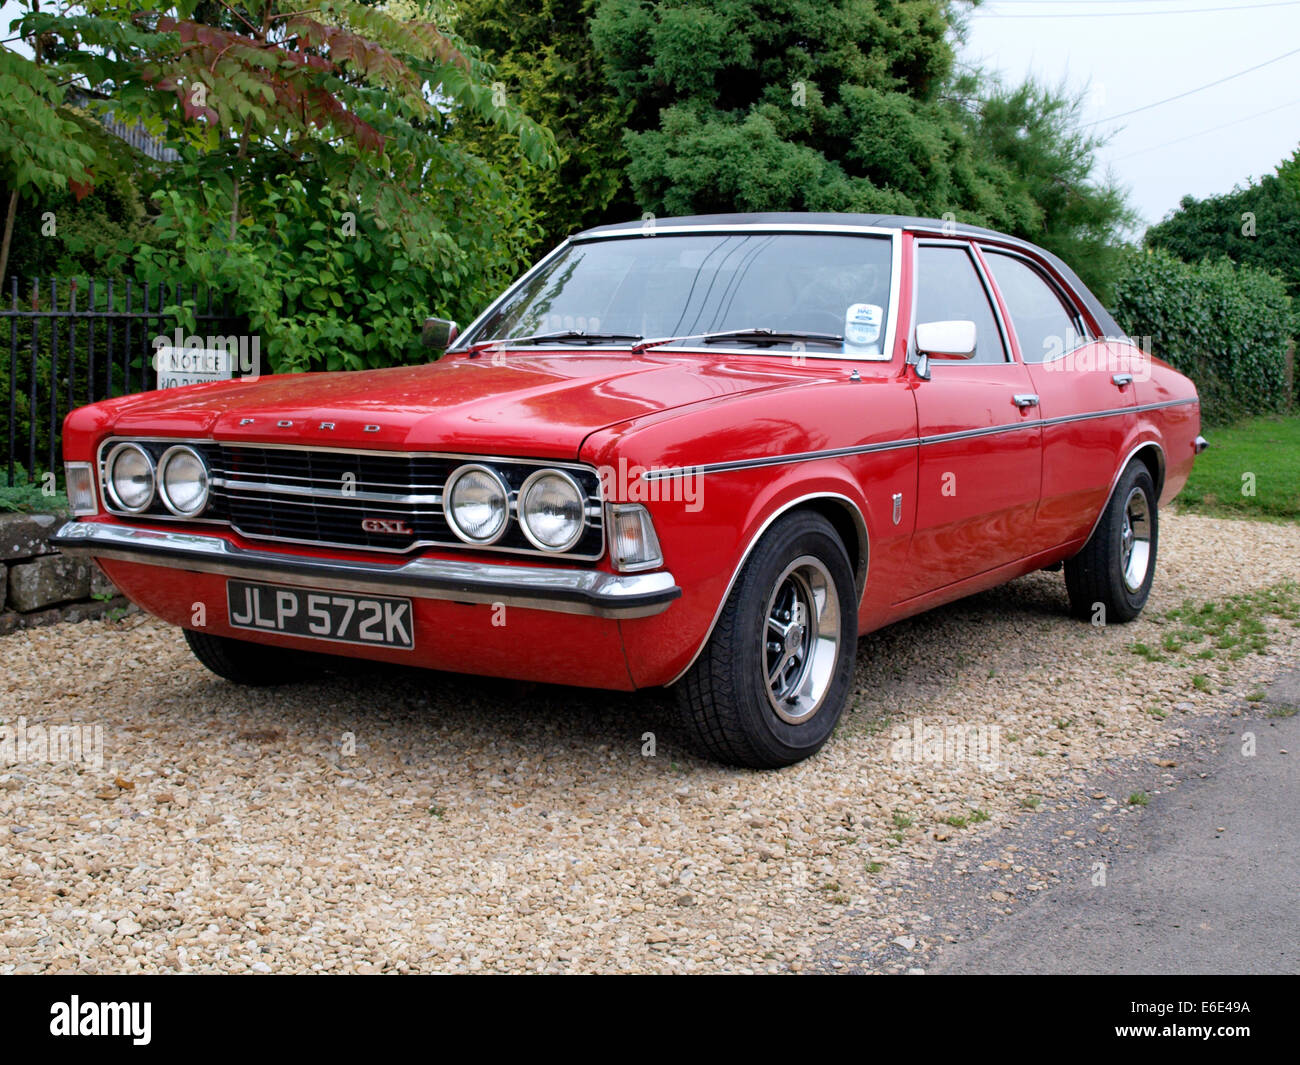 Ford Cortina 1970s High Resolution Stock Photography and Images - Alamy